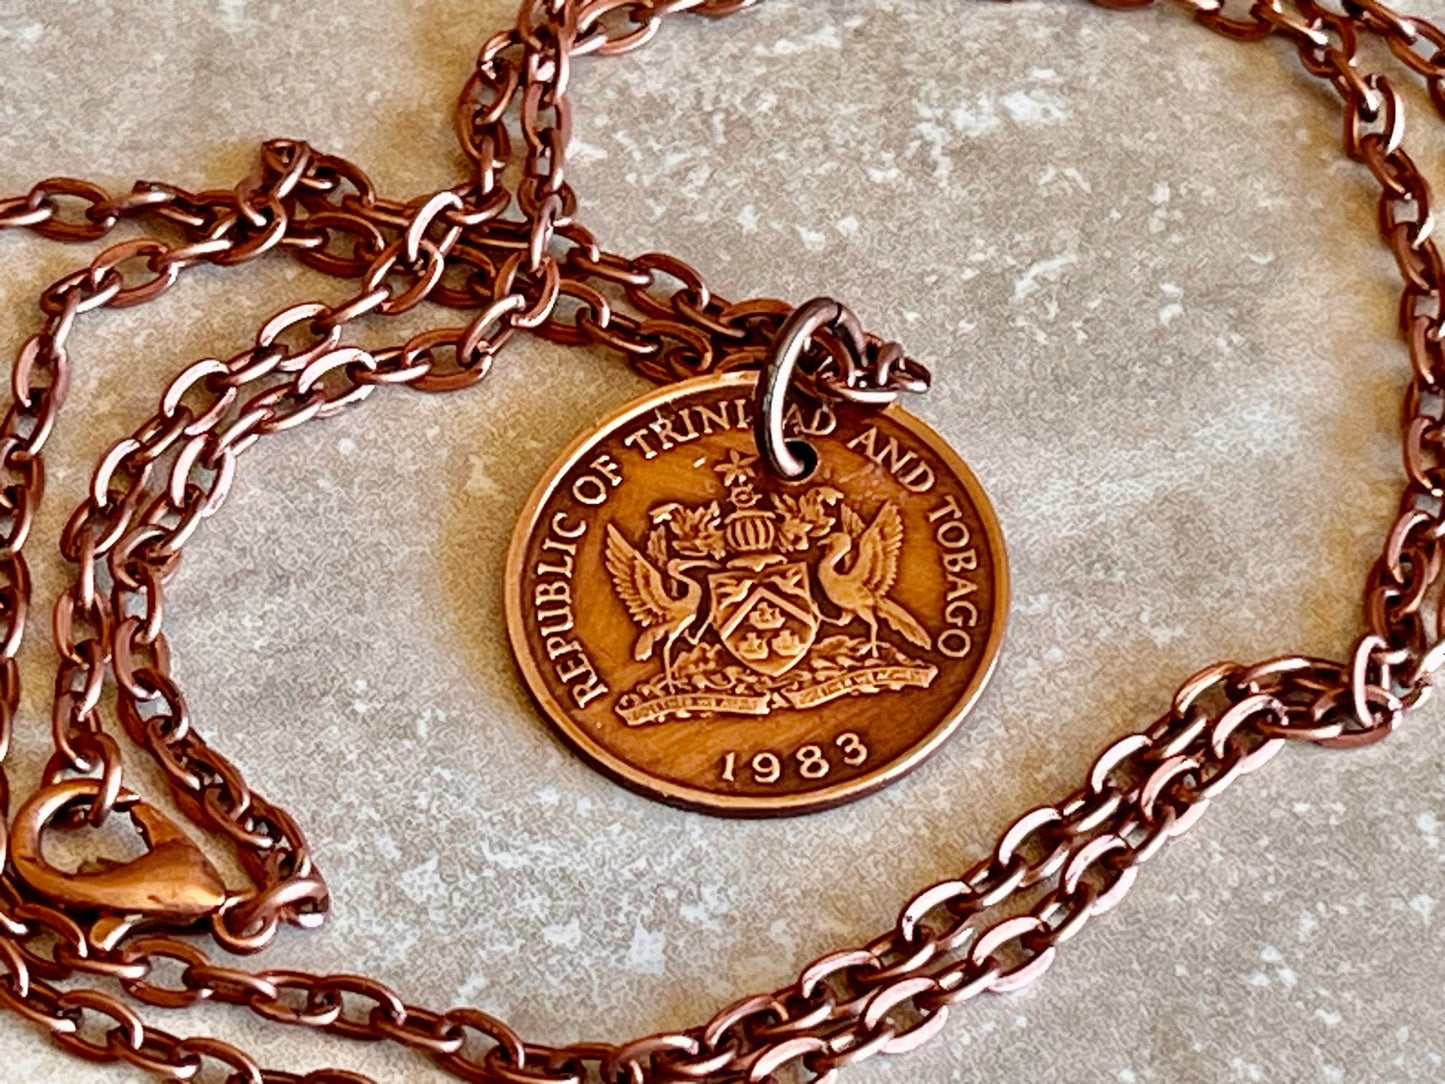 Trinidad and Tobago Coin Necklace 5 Cents Personal Necklace Old Vintage Handmade Jewelry Gift Friend Charm For Him Her World Coin Collector